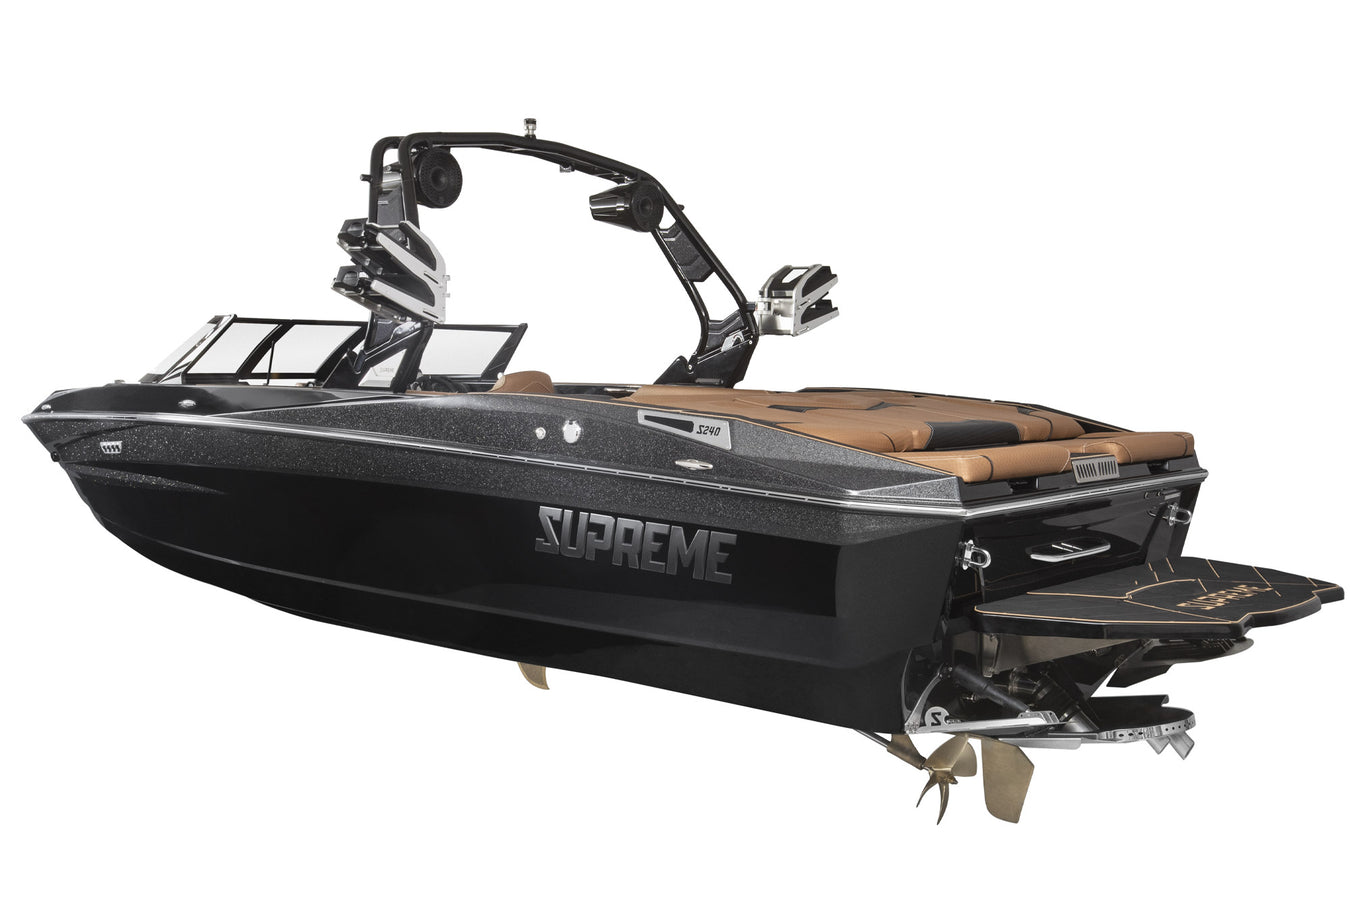  Try this Supreme S240 wakeboard wakesurf boat rental at Lake Powell